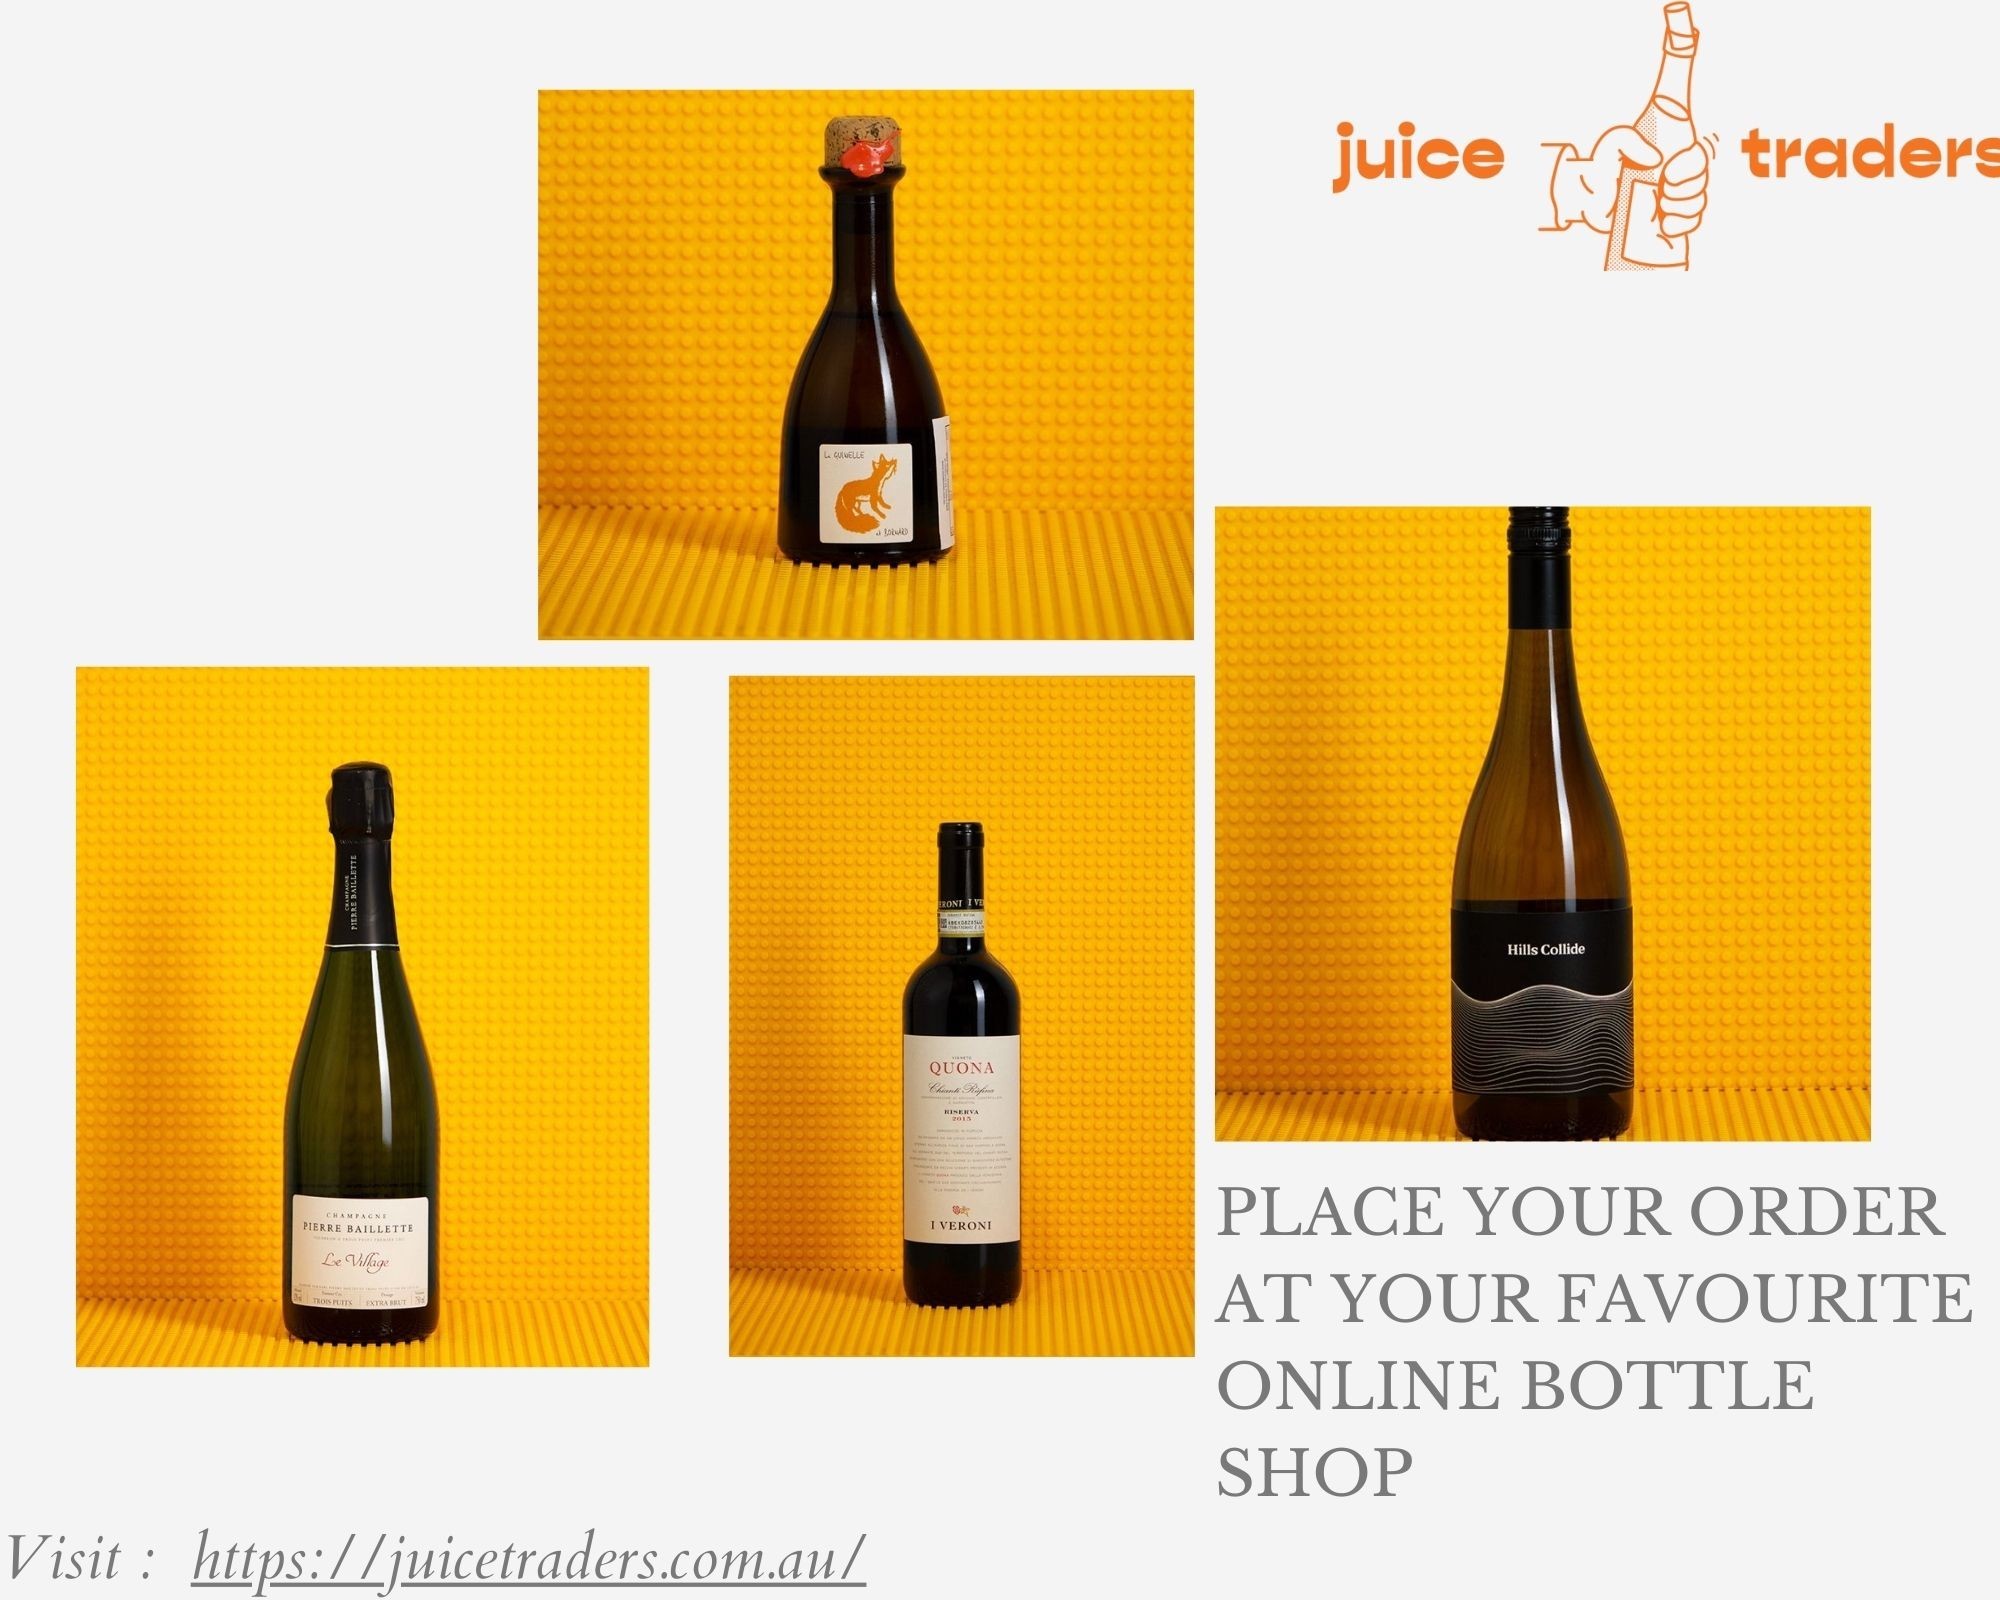 Place your order at your favourite online bottle shop